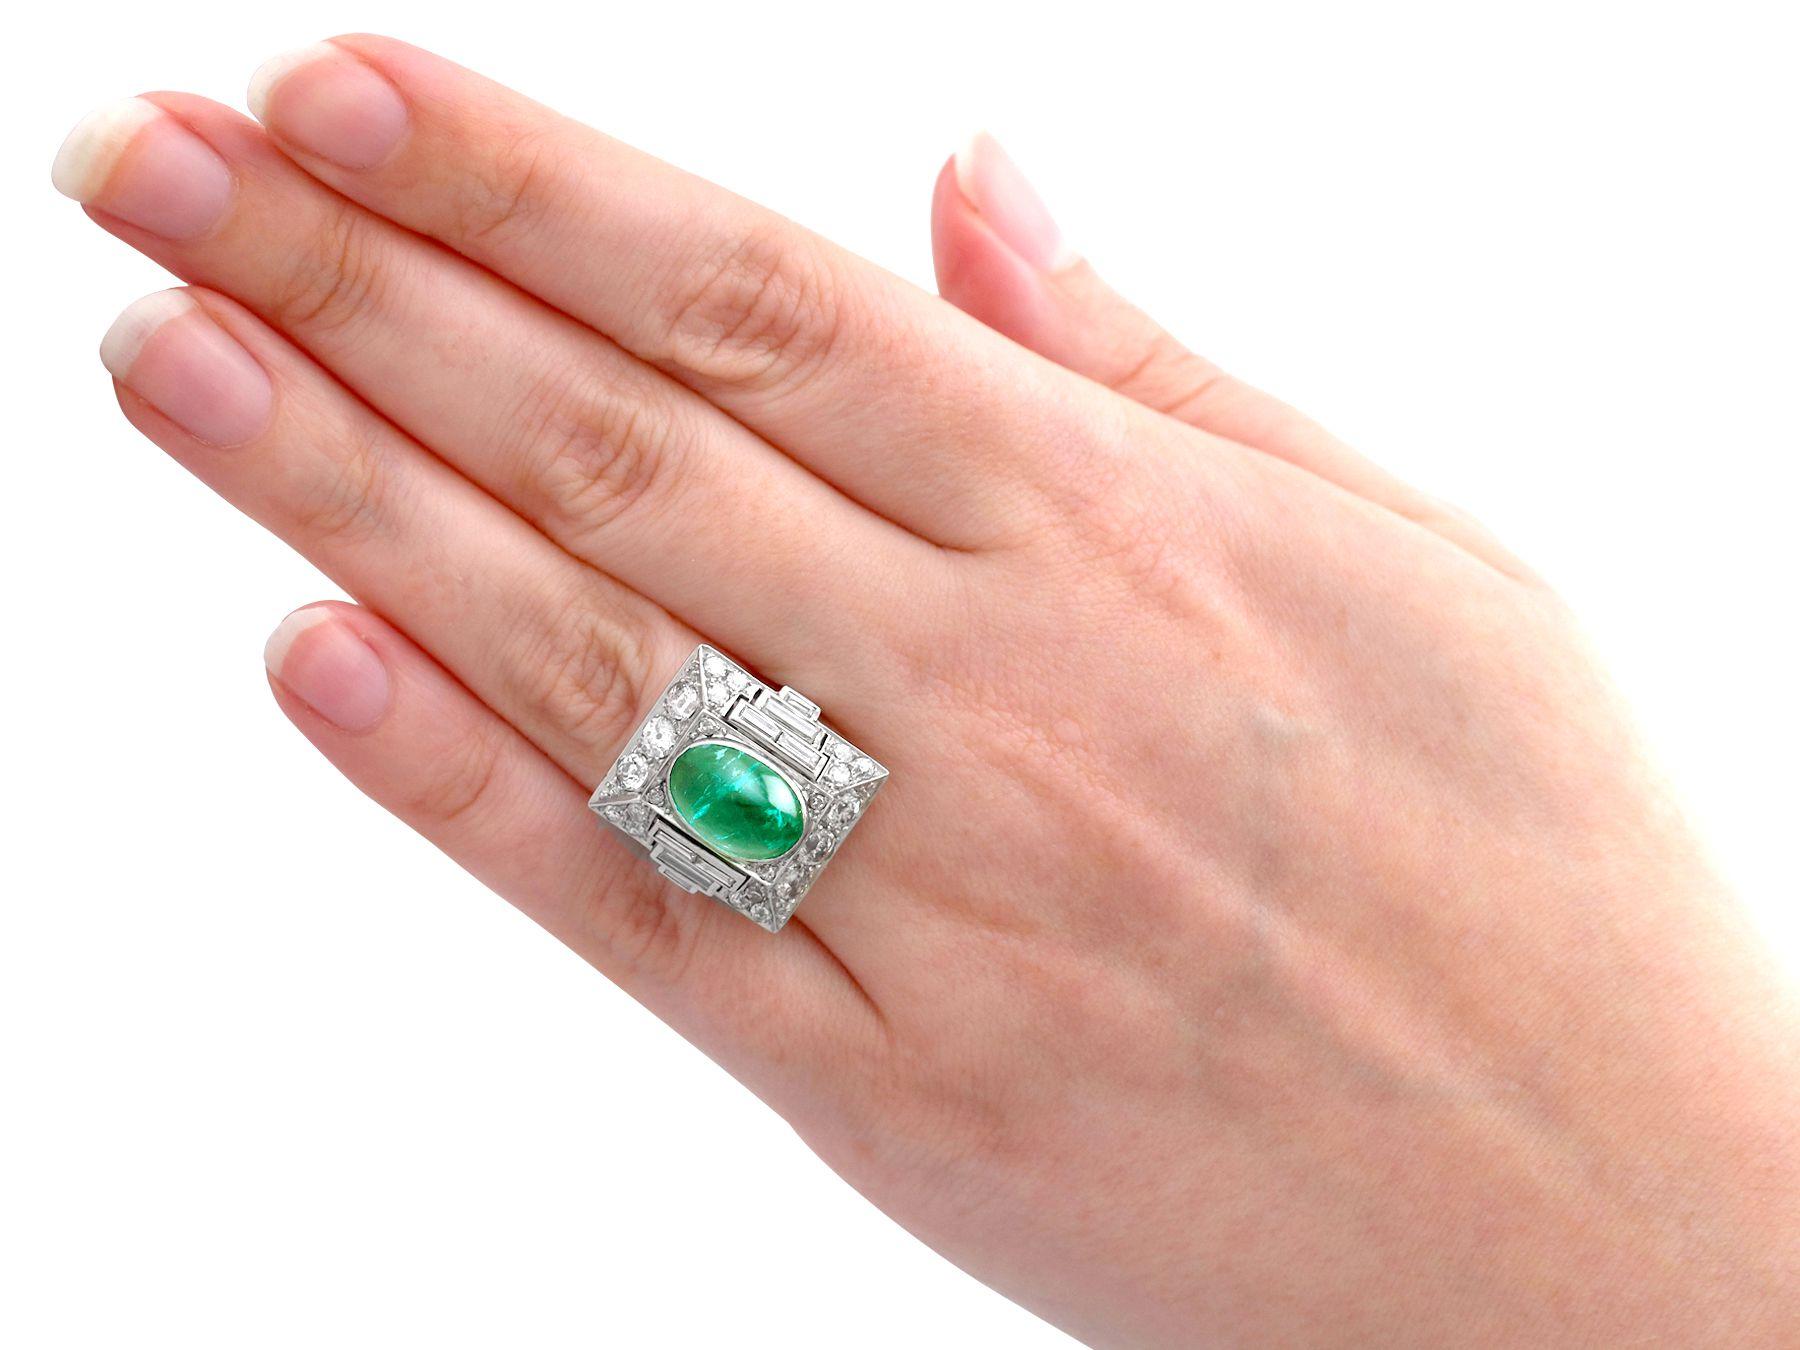 1935 Antique 3.40ct Cabochon Cut Emerald and 2.72ct Diamond Cocktail Ring For Sale 1